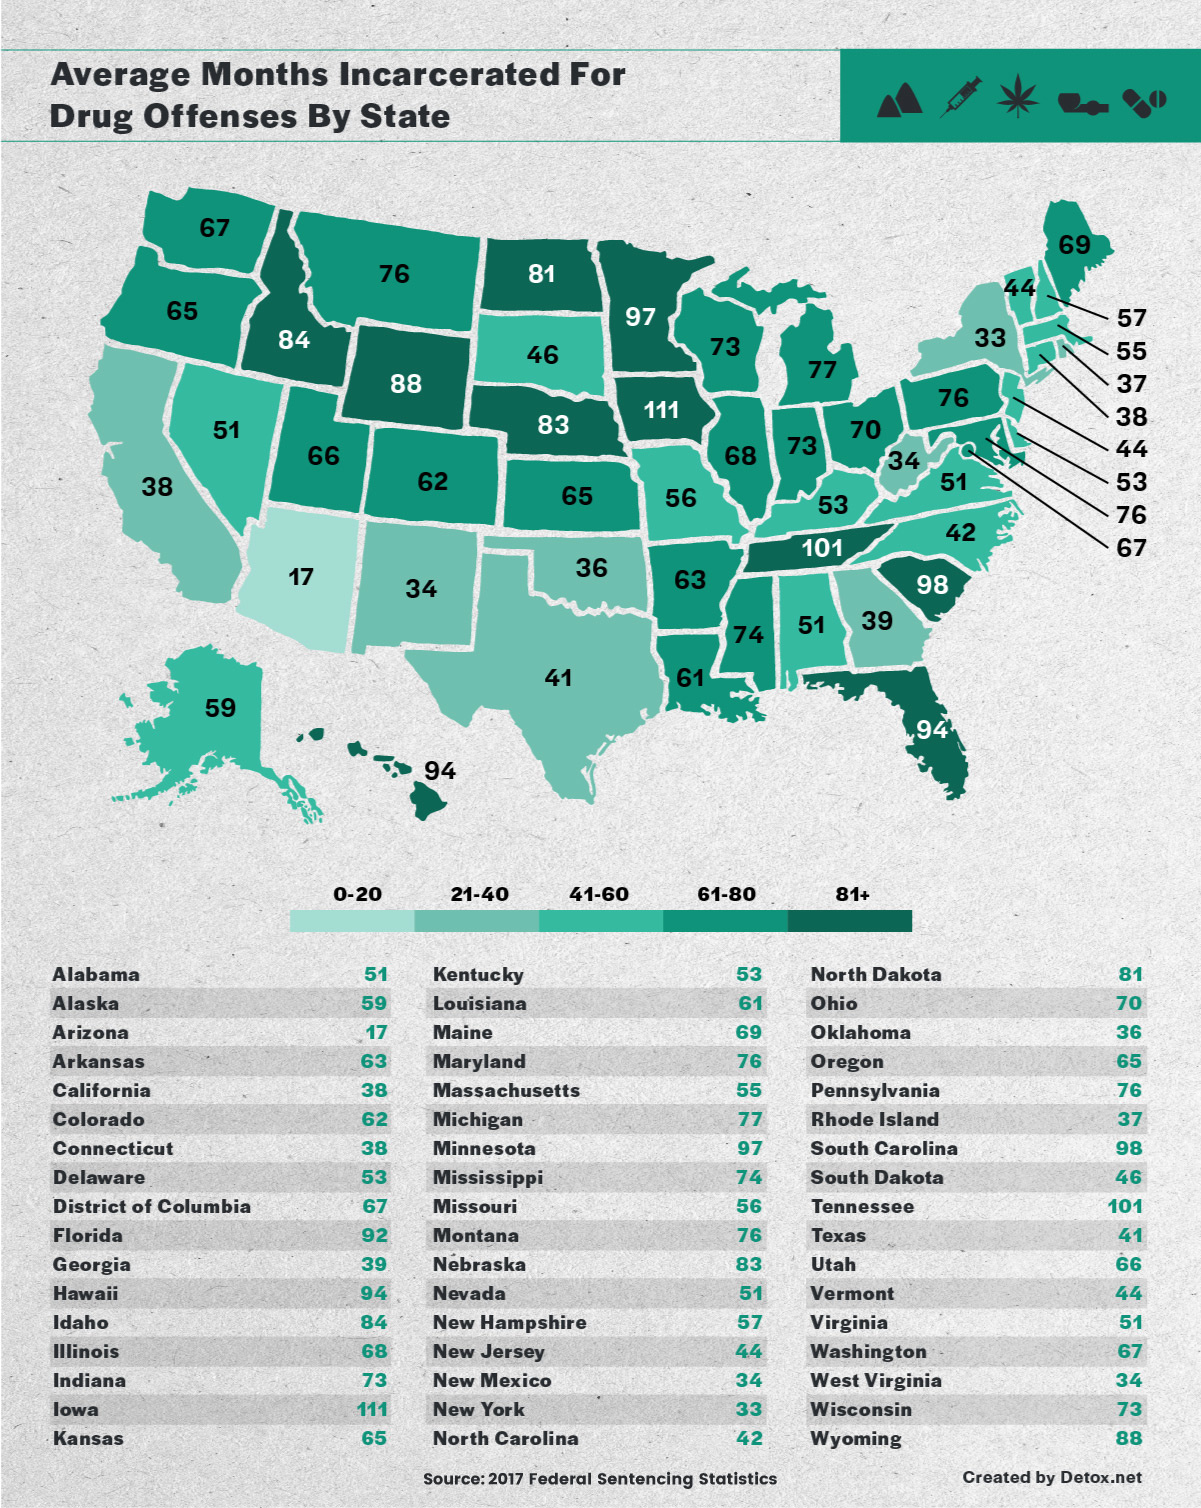 Maps reveal how each U.S. state enforces drug laws differently Big Think